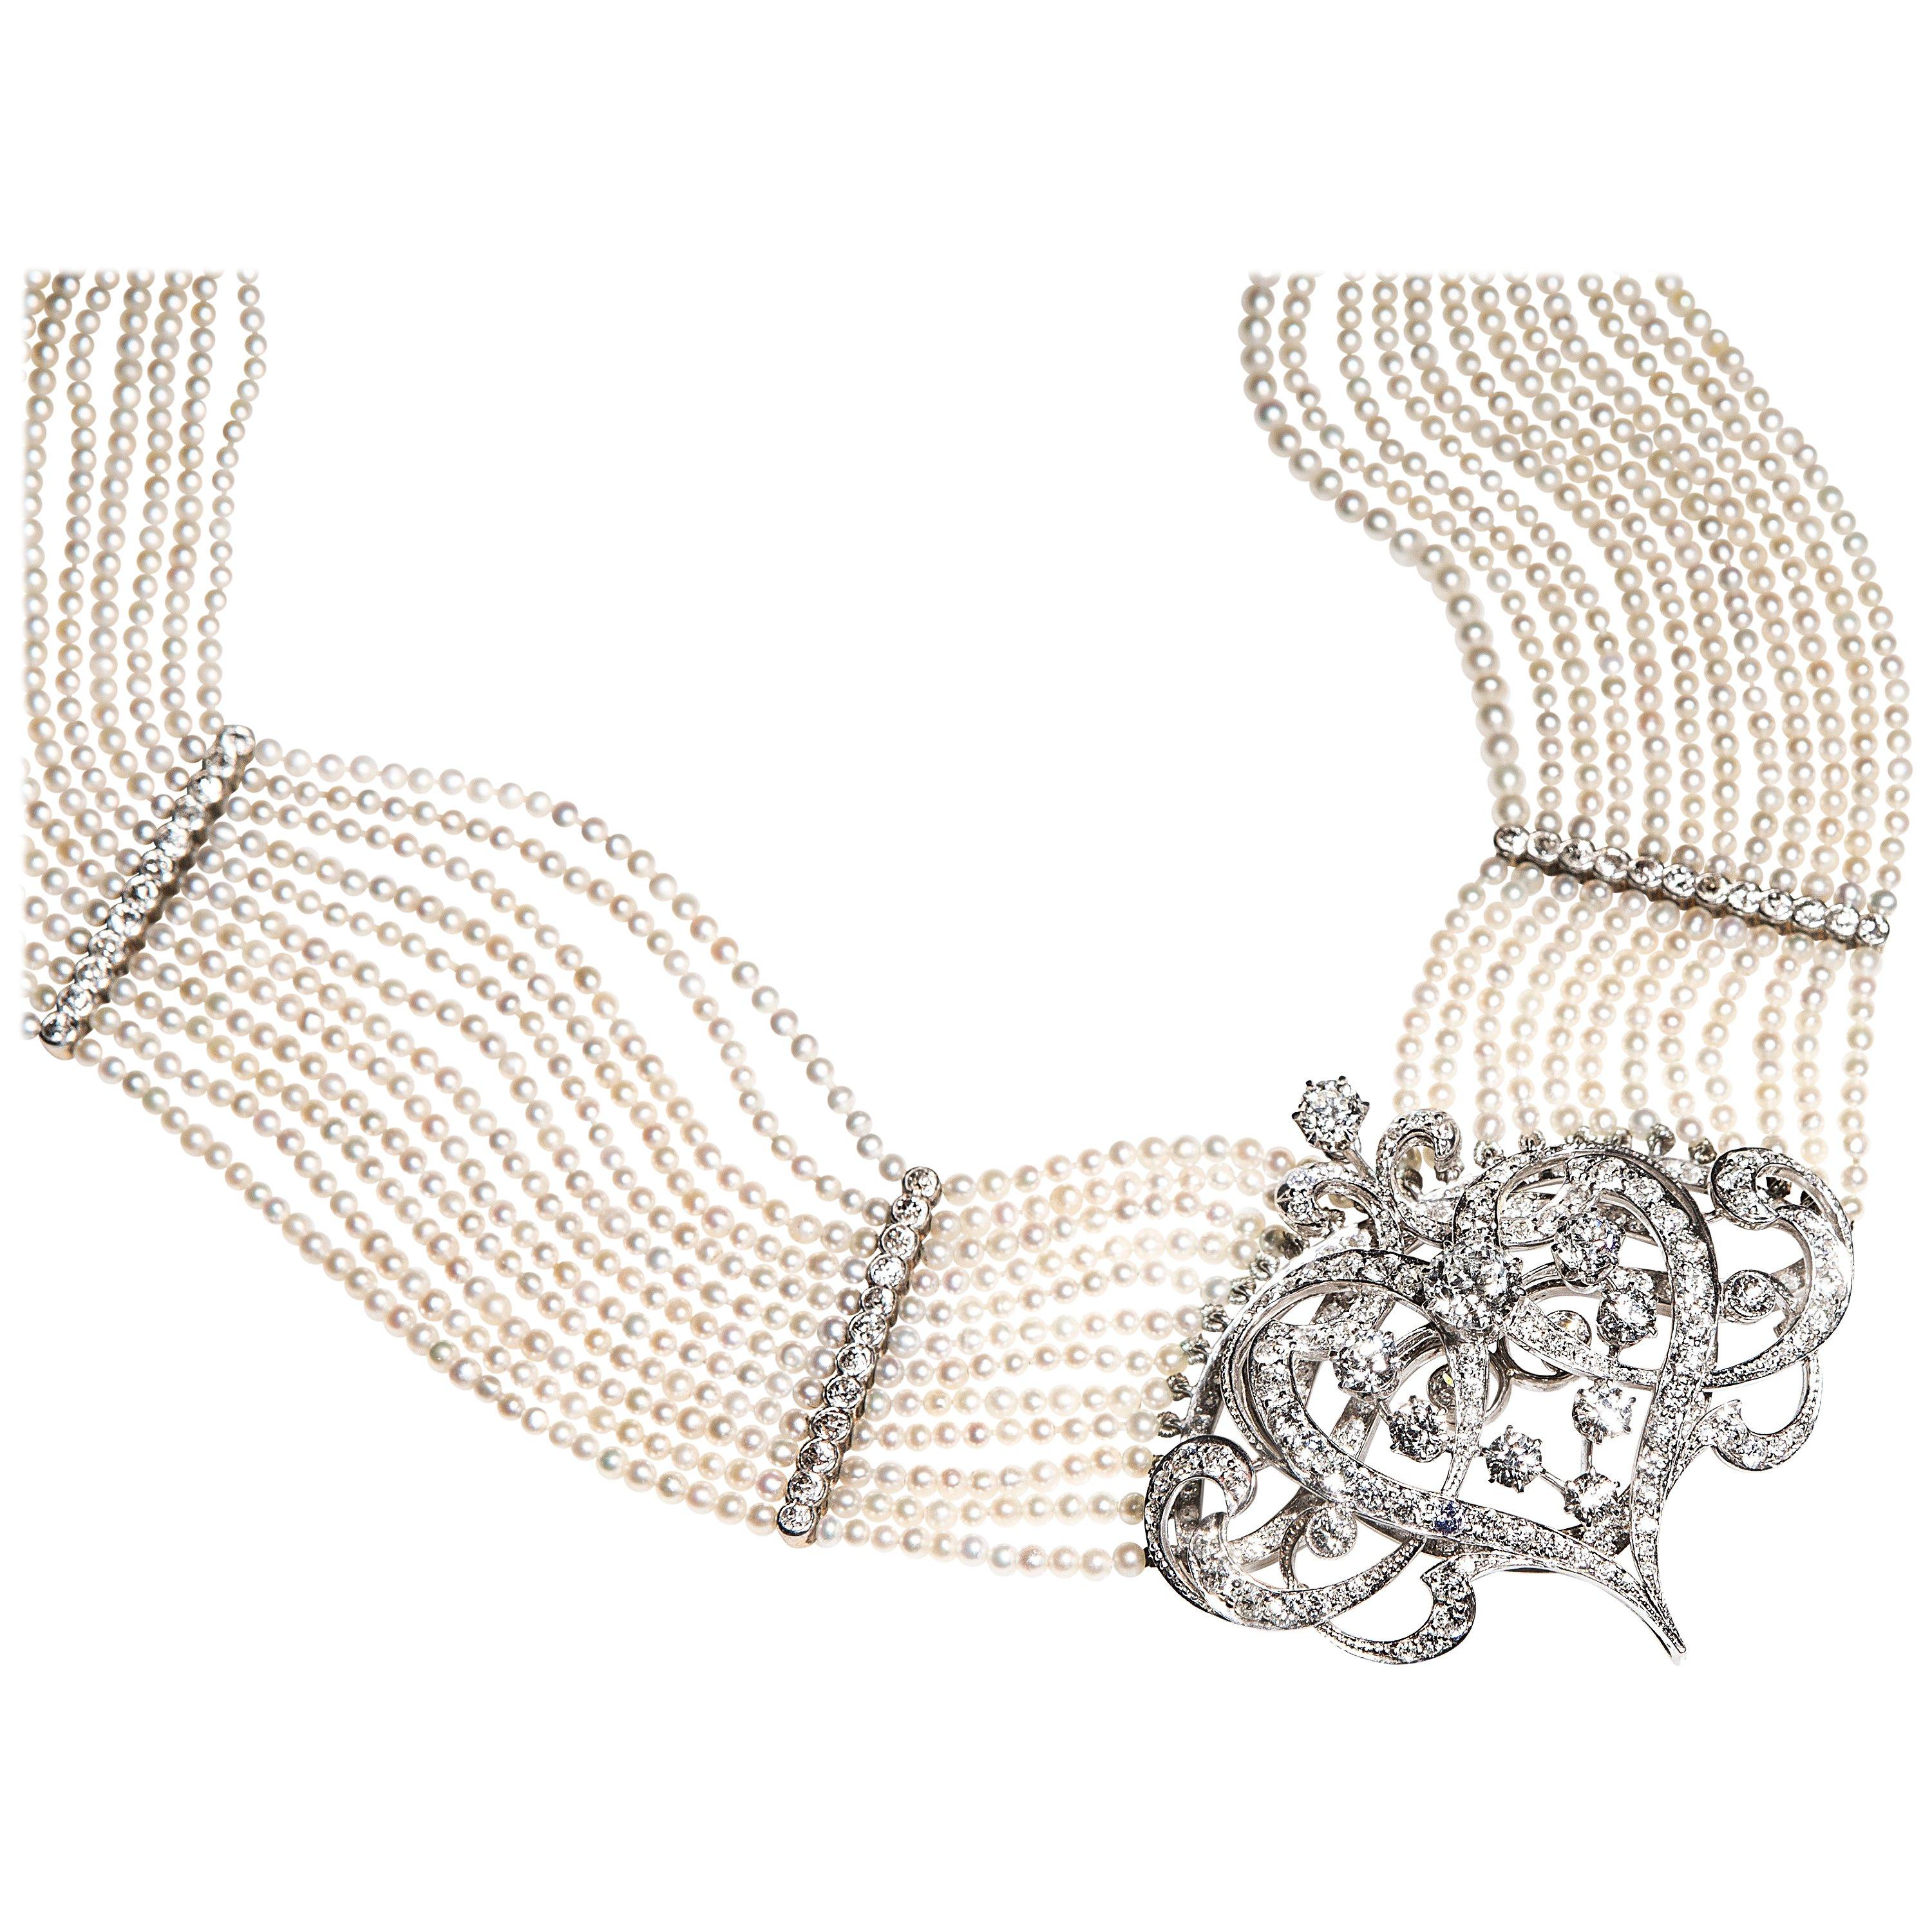 Stunning choker composed of 12 strands seed pearls (circa 2,5 mm to 3 mm) well matched, of cream body color with faint rose overtones. They are of good quality and luster. The strands are divided by finely wrought partitions made of platinum and